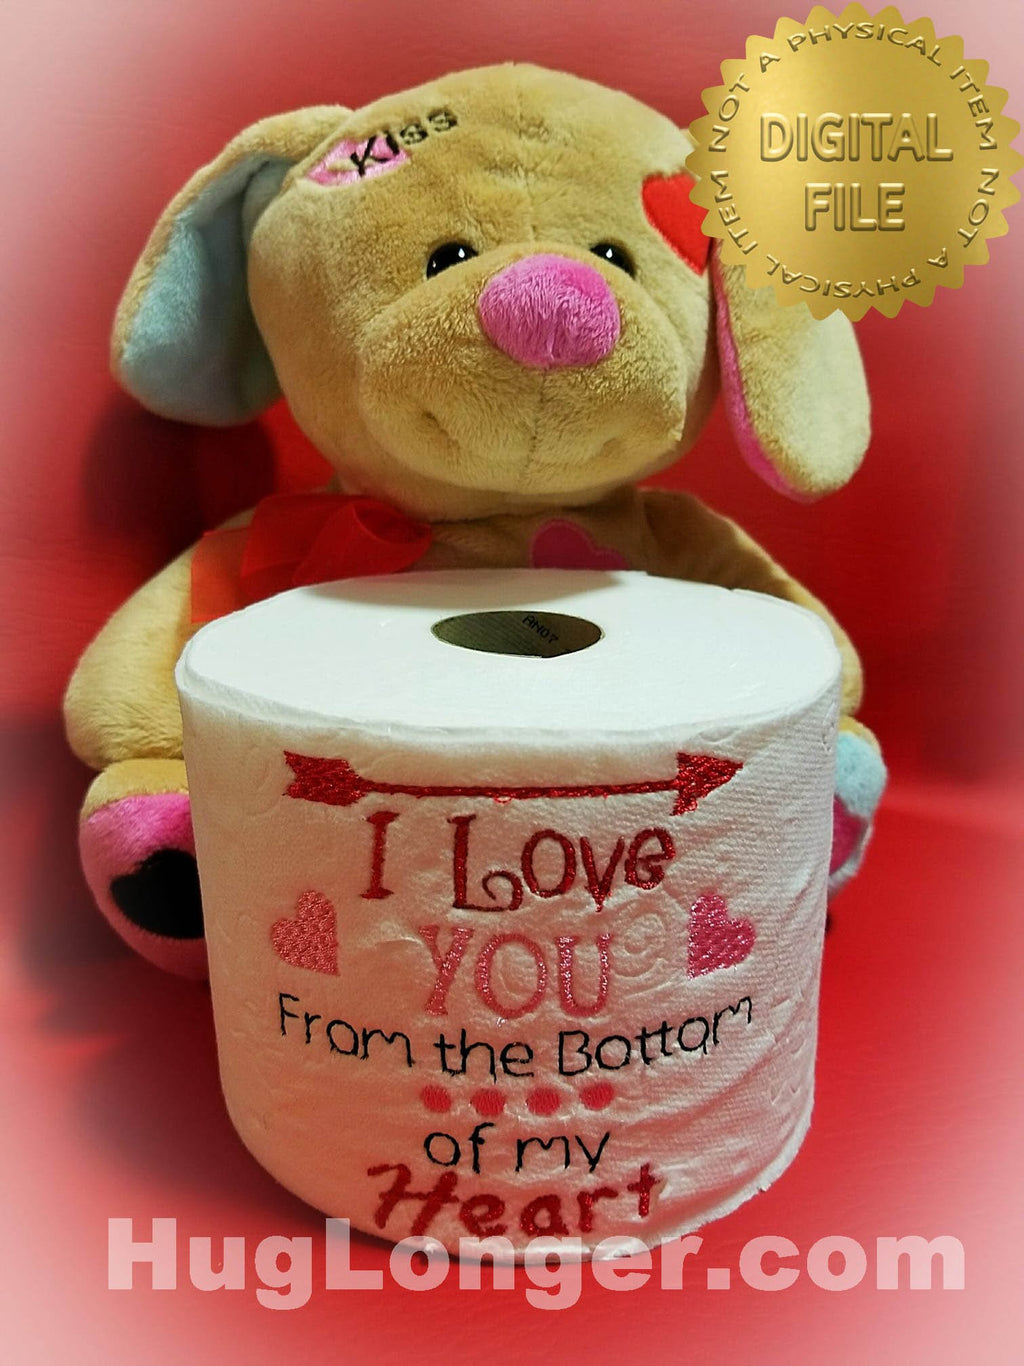 I Love You From the Bottom of my Heart TP HL2479 embroidery files